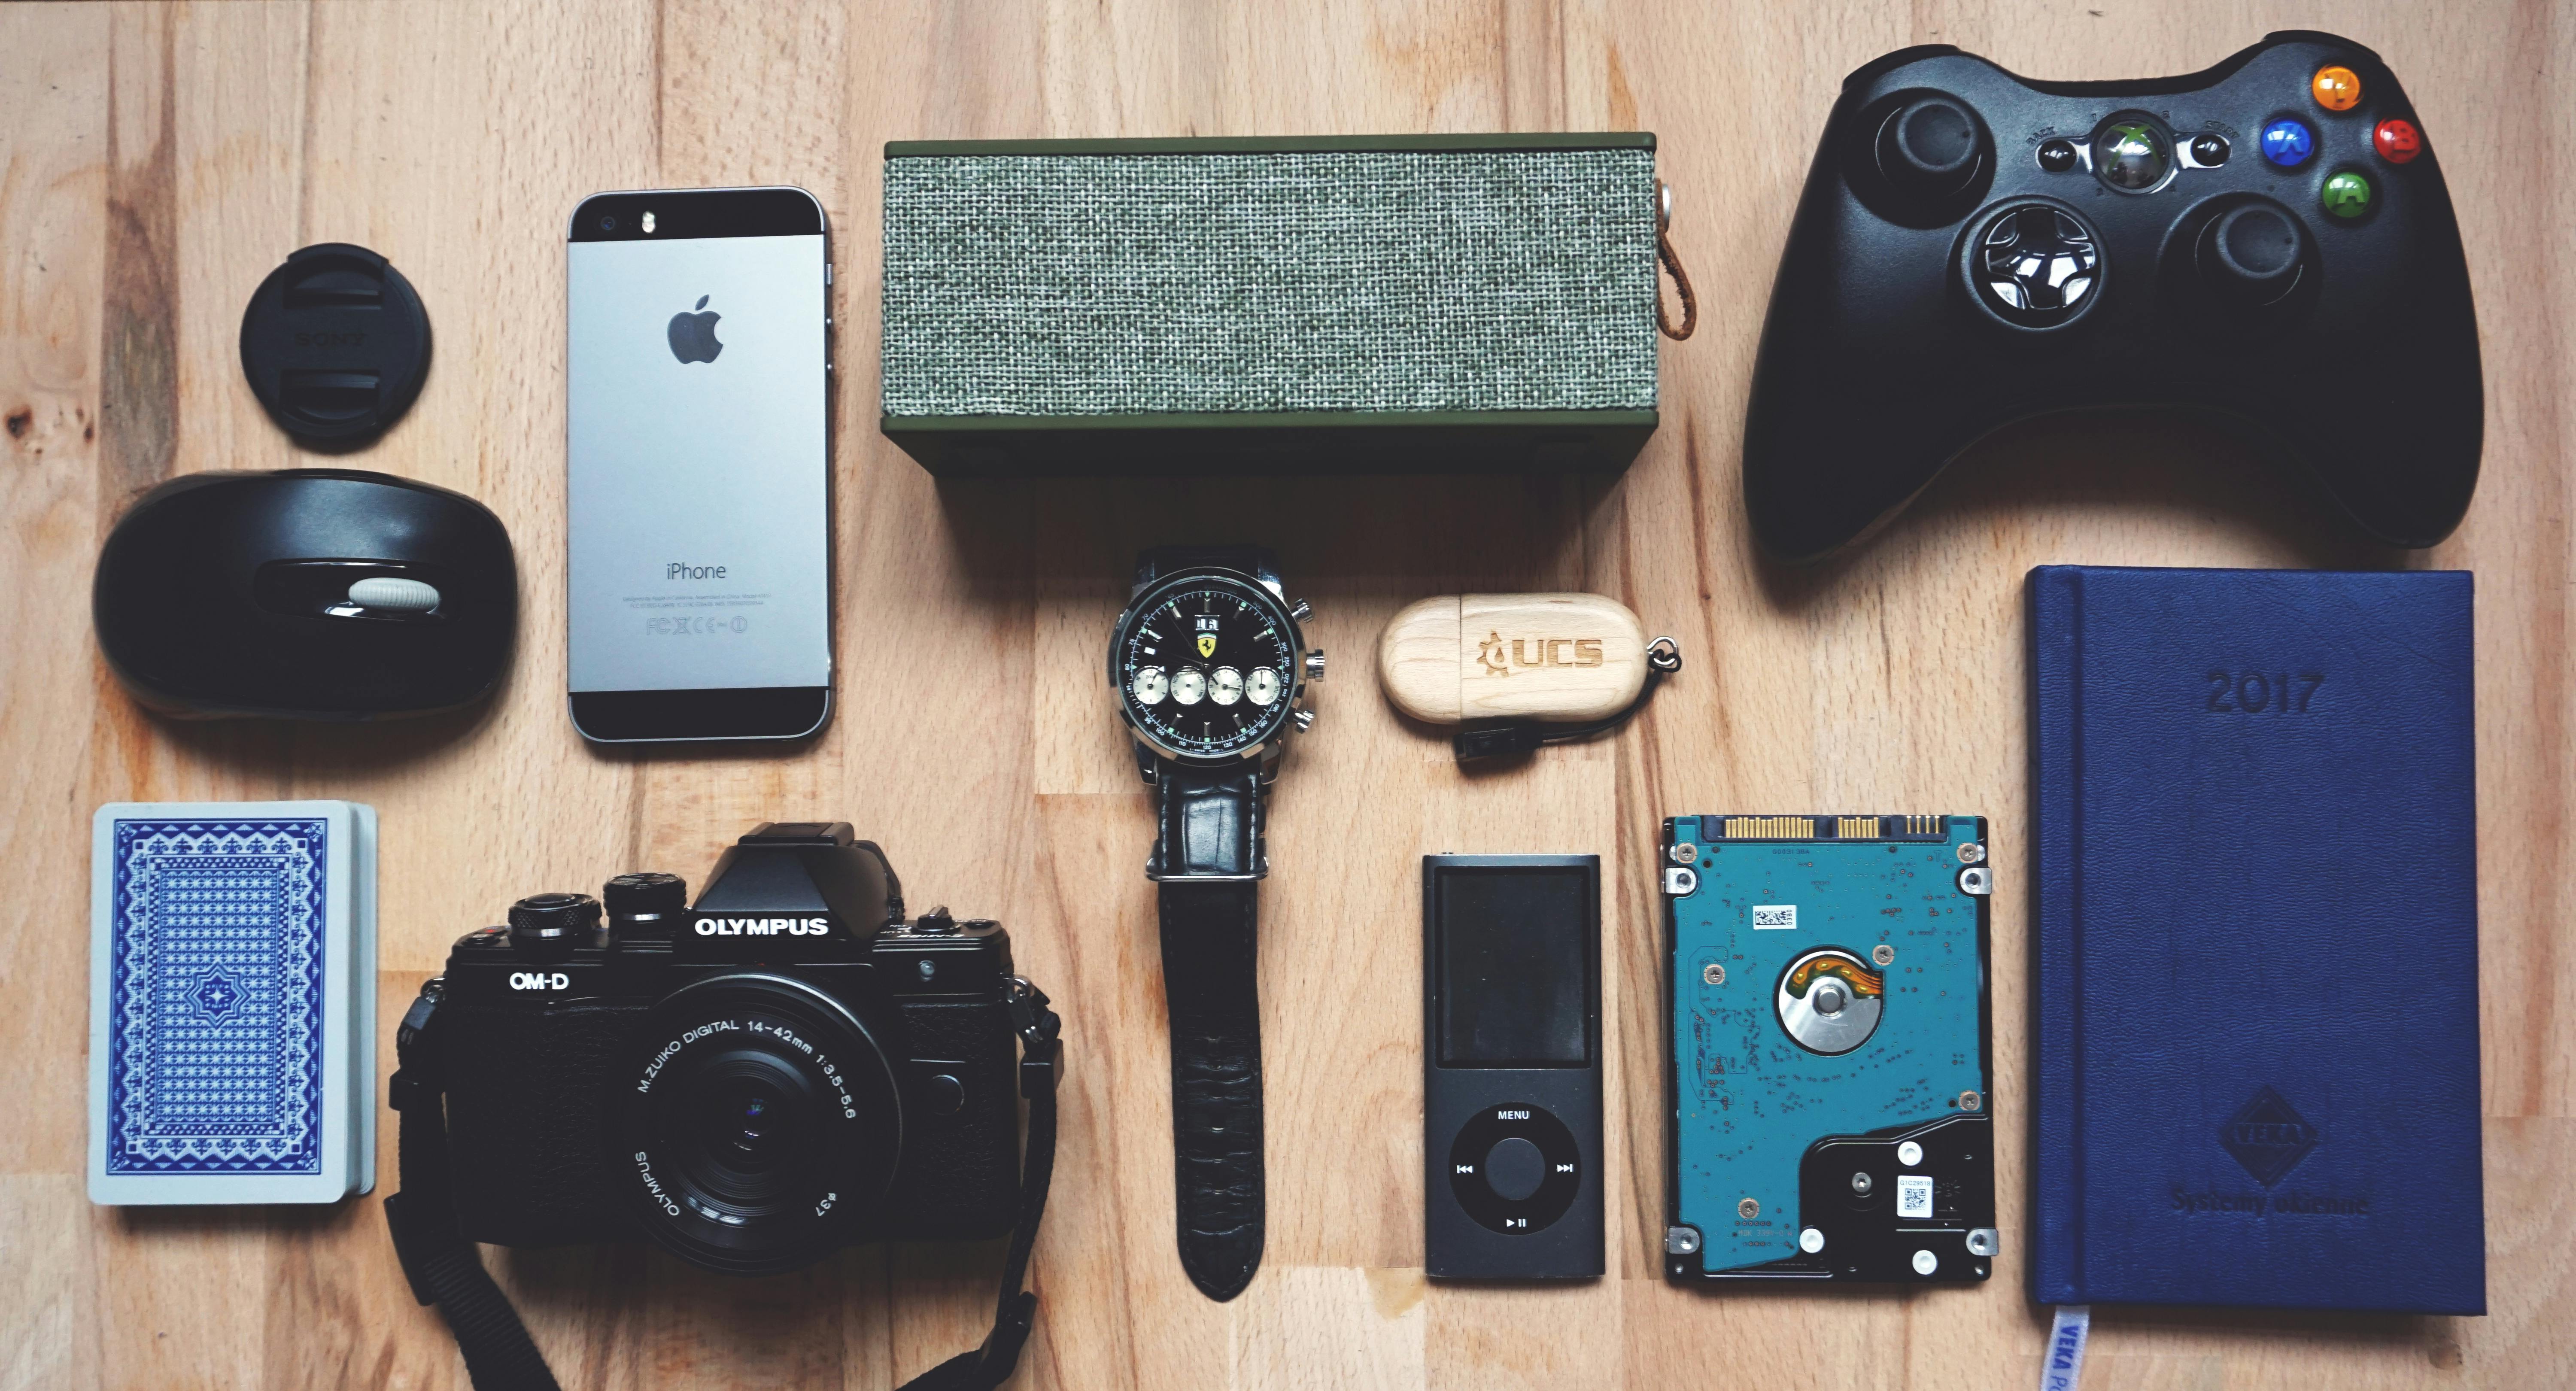 Gadgets Photos Download The Best Free Gadgets Stock Photos And Hd Images